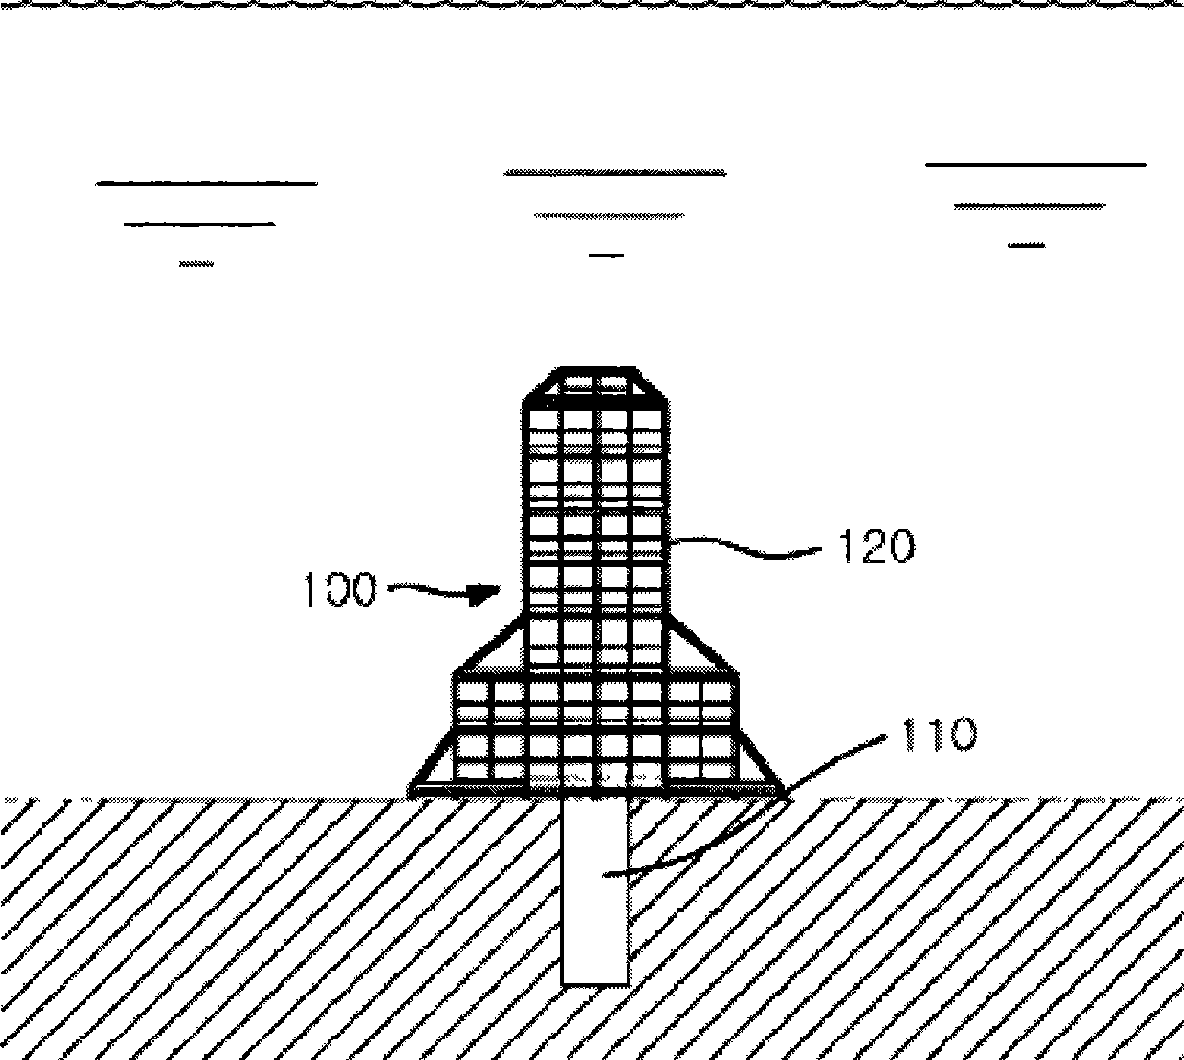 Seabed-fixed marine structure functioning as artificial reef and manufacturing method thereof